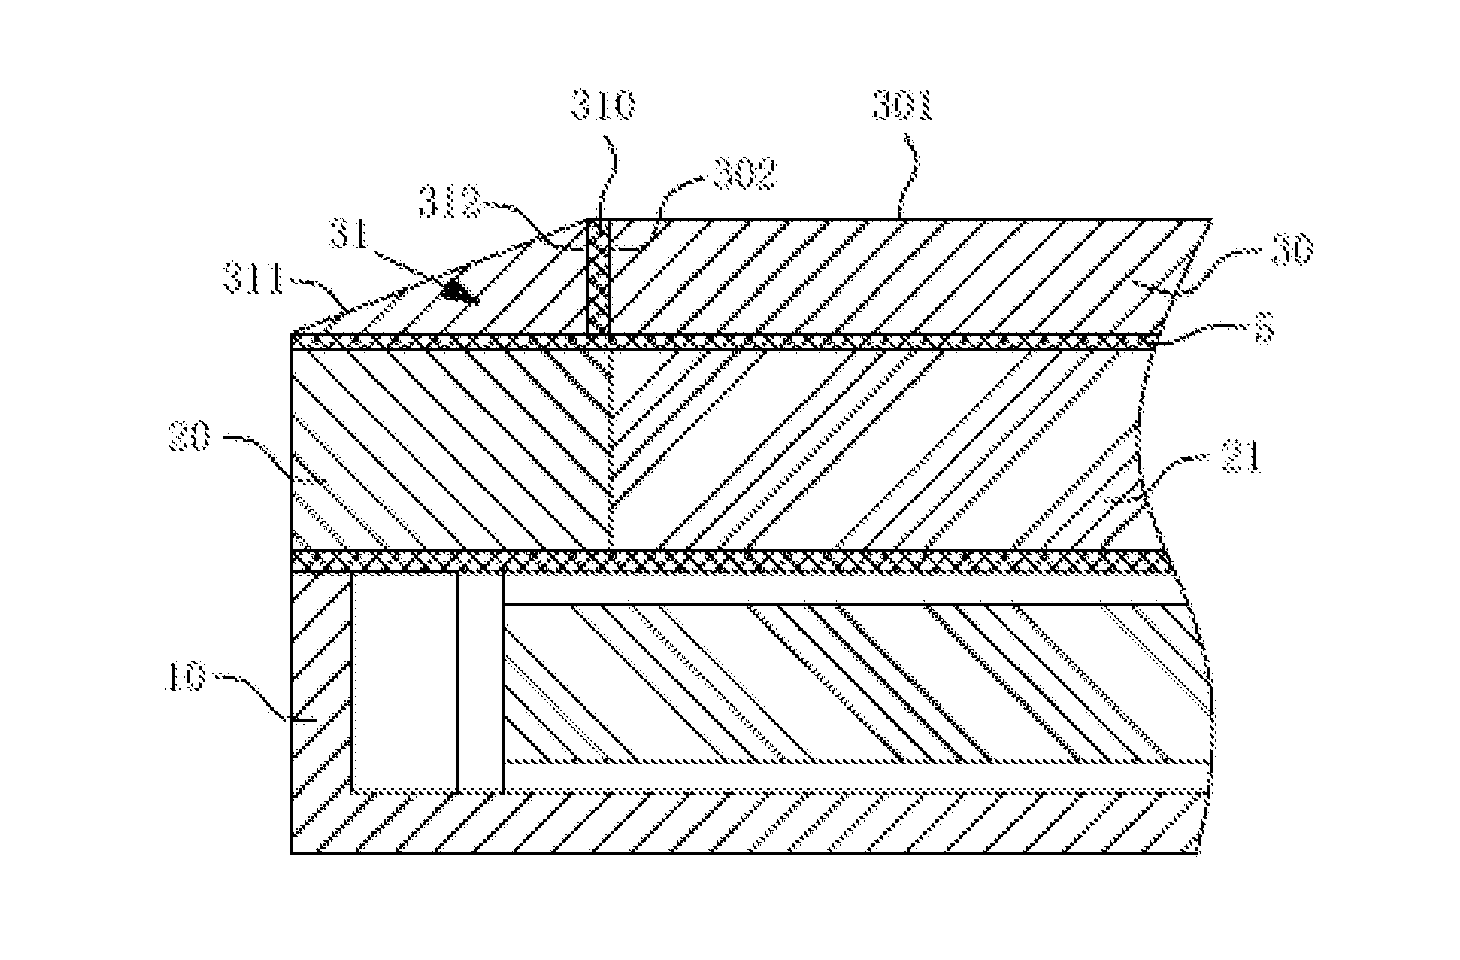 Frame Structure for a Liquid Crystal Display